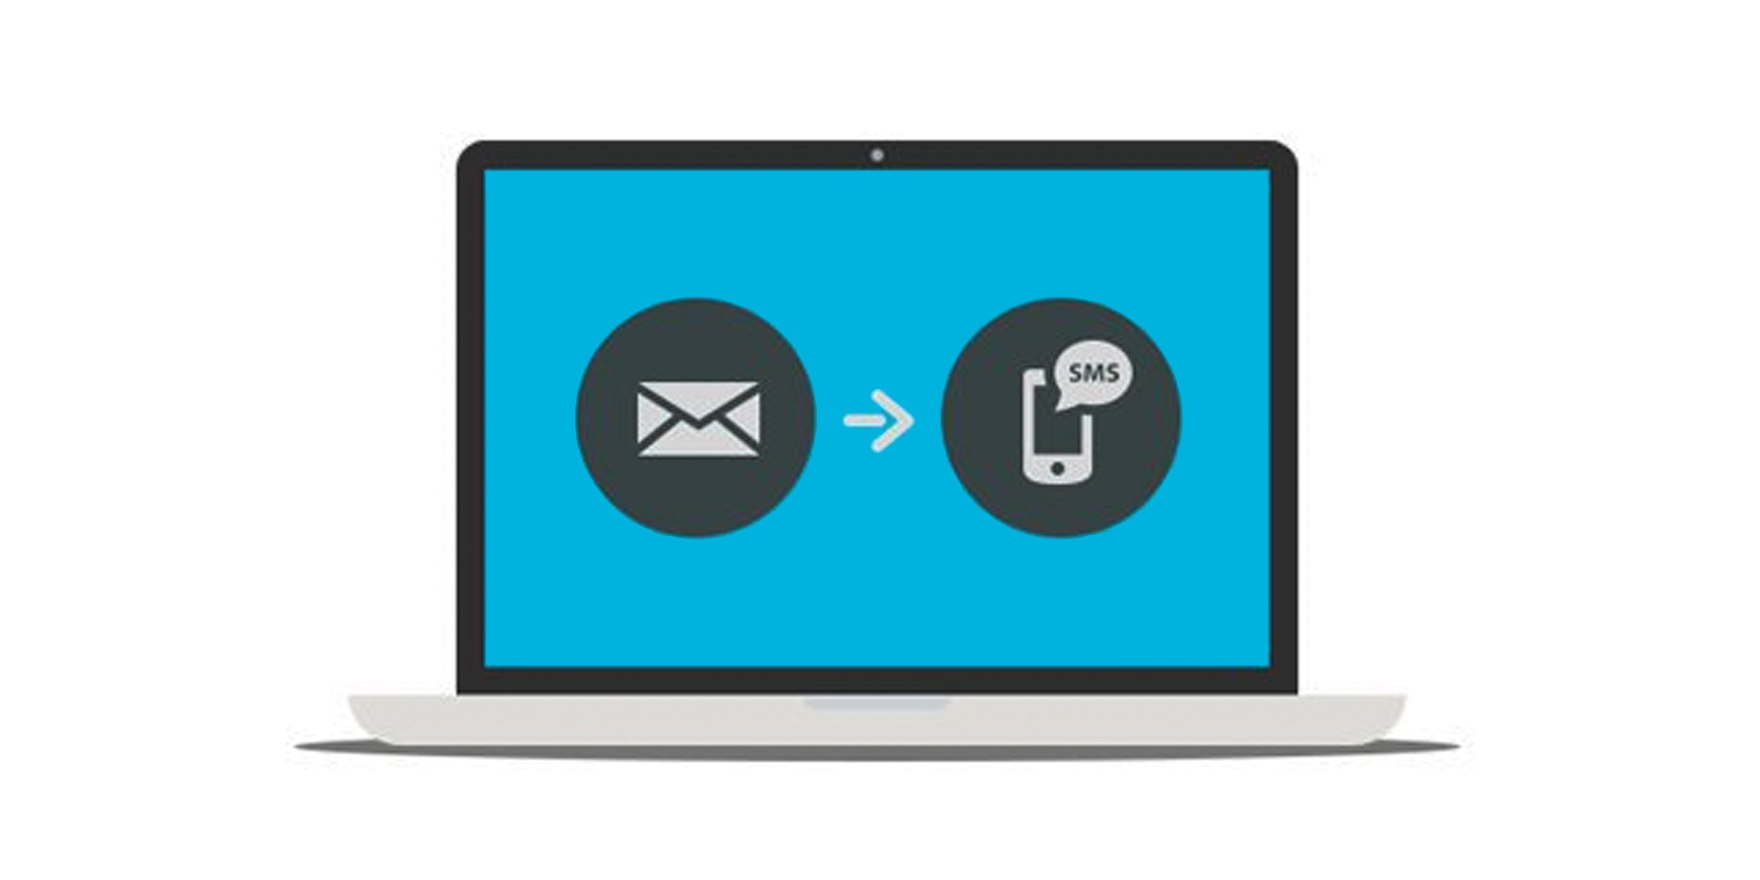 Email-To-SMS Gateways